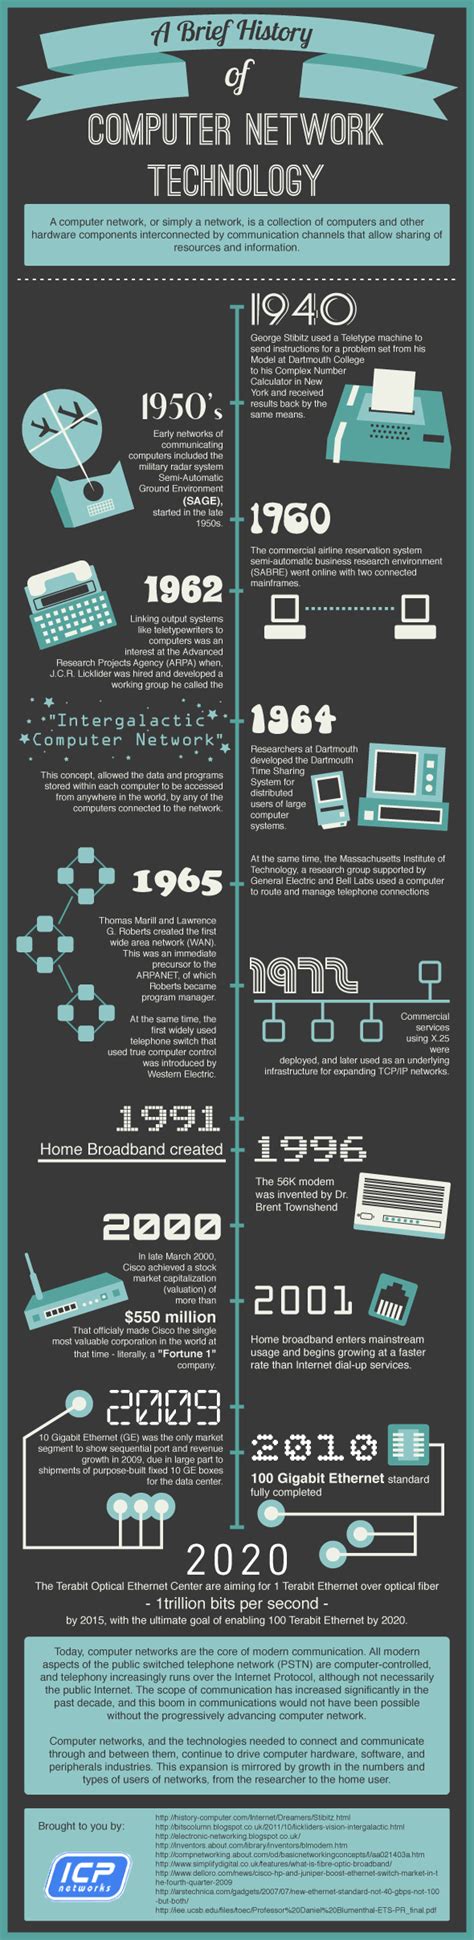 An Infographic On The Evolution Of Computer Network Technology From